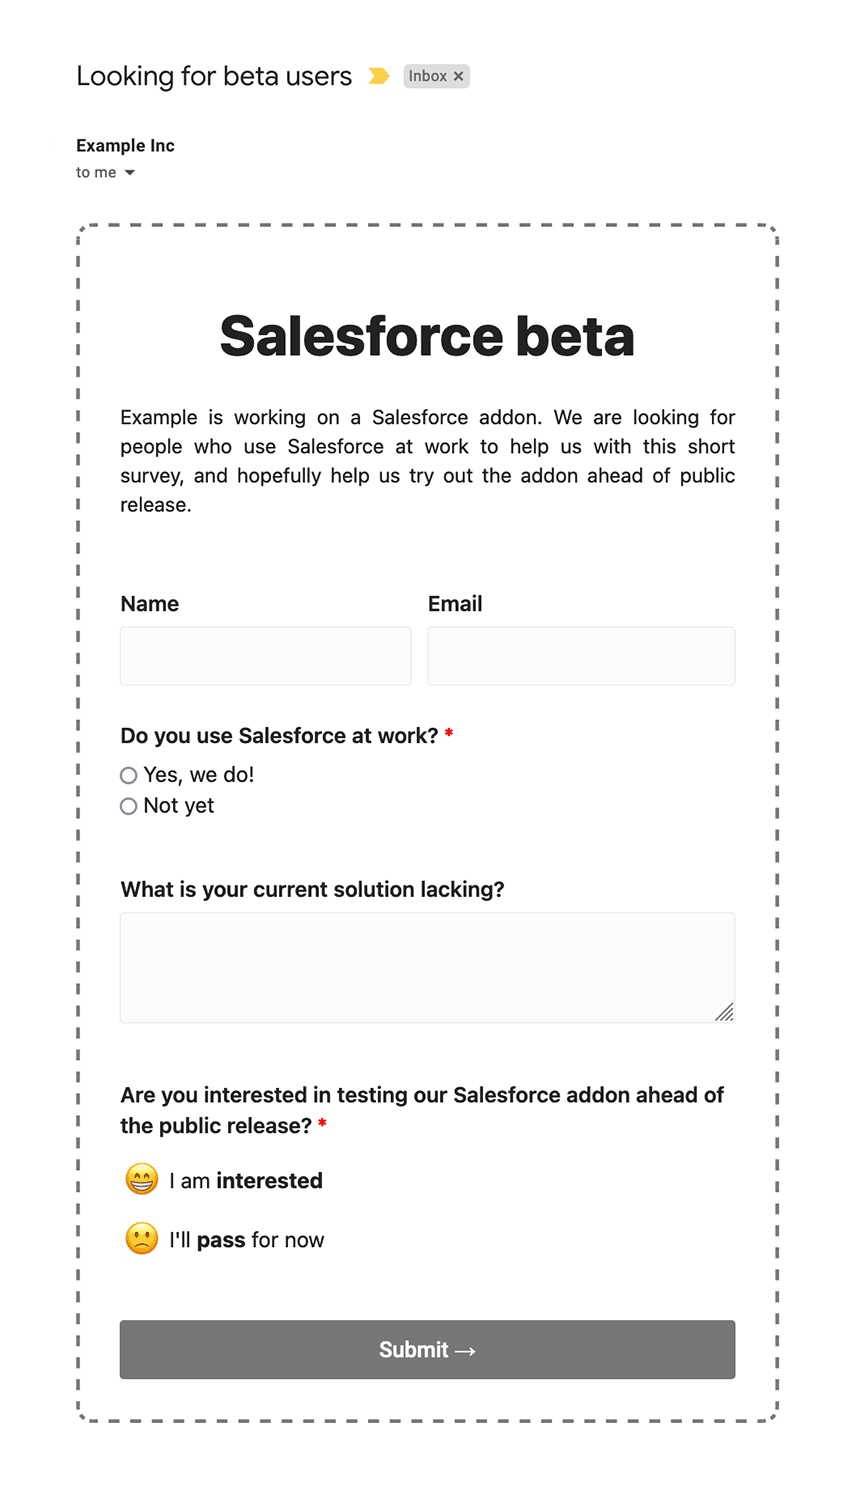 Beta user signup email form template